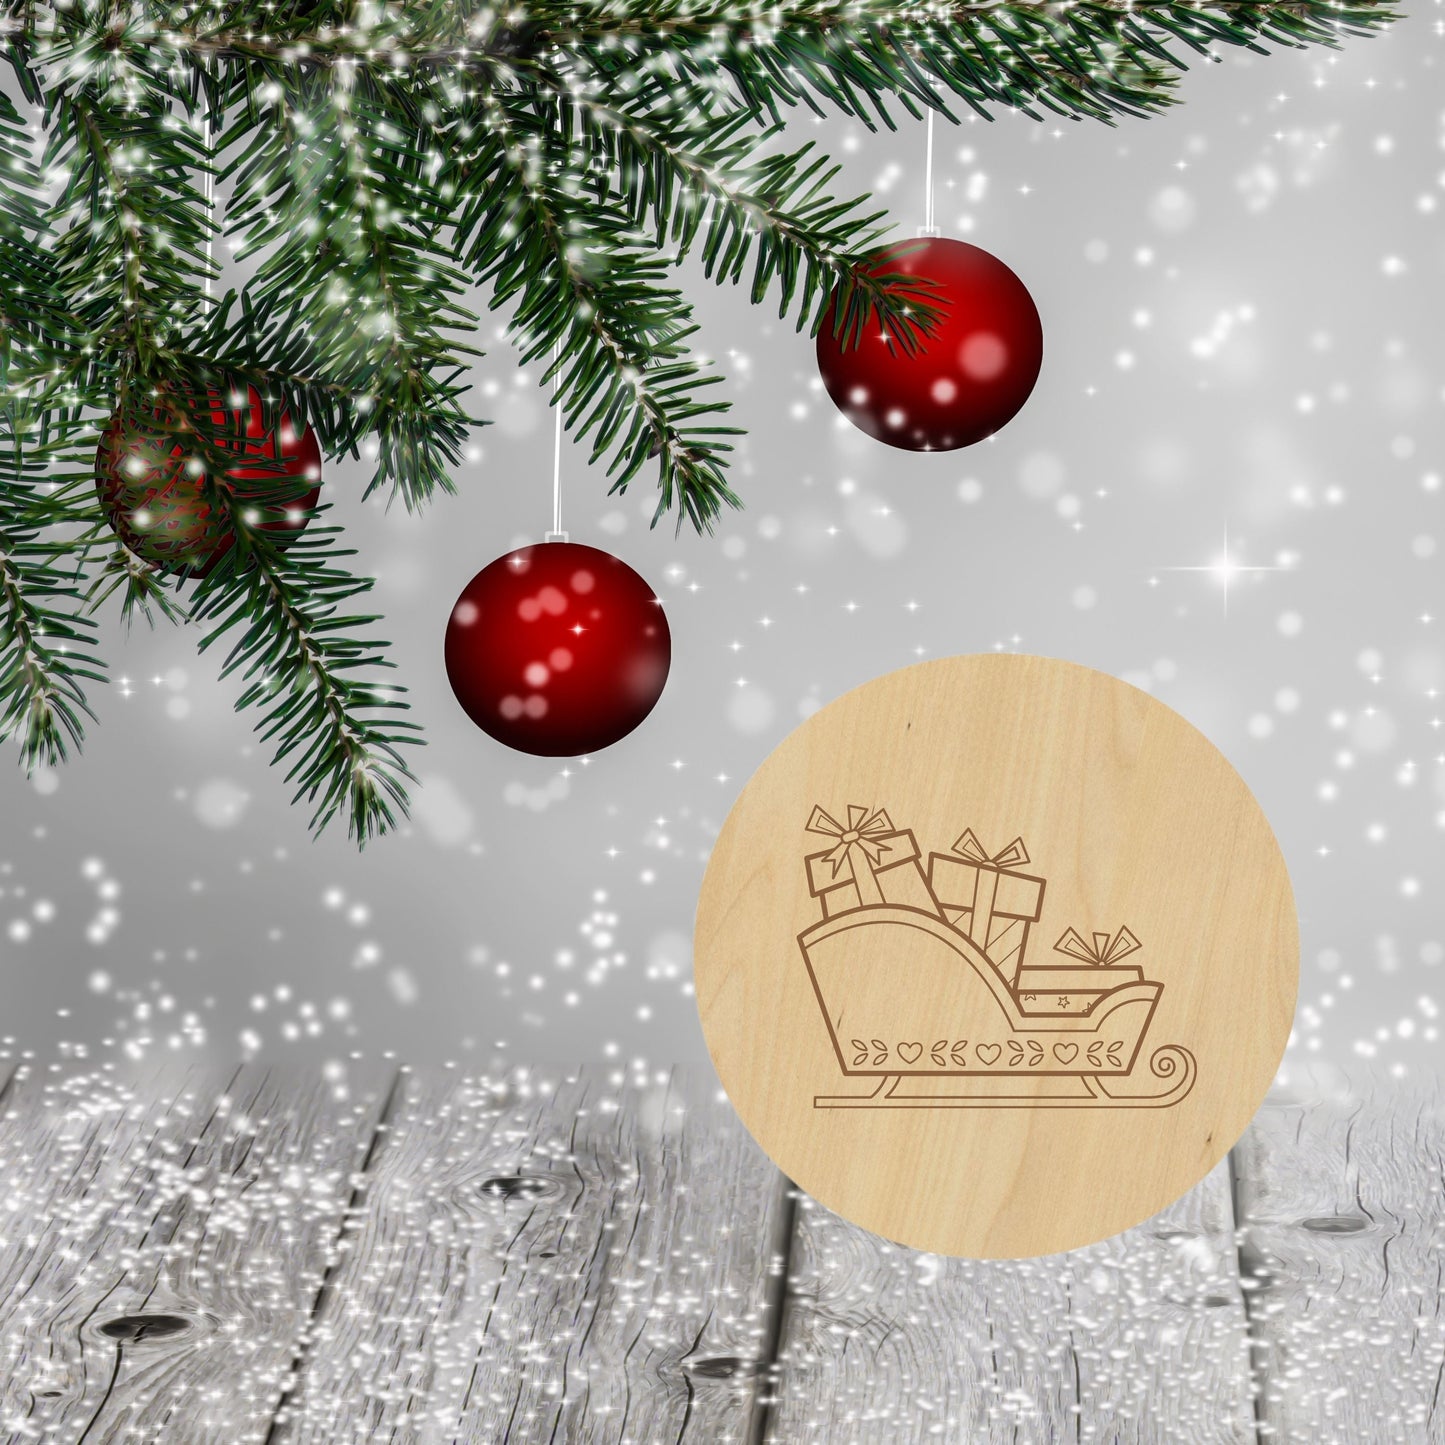 Sleigh Ride Coaster - Premium Coasters from Hipster Lasers - Just $10! Shop now at Hipster Lasers